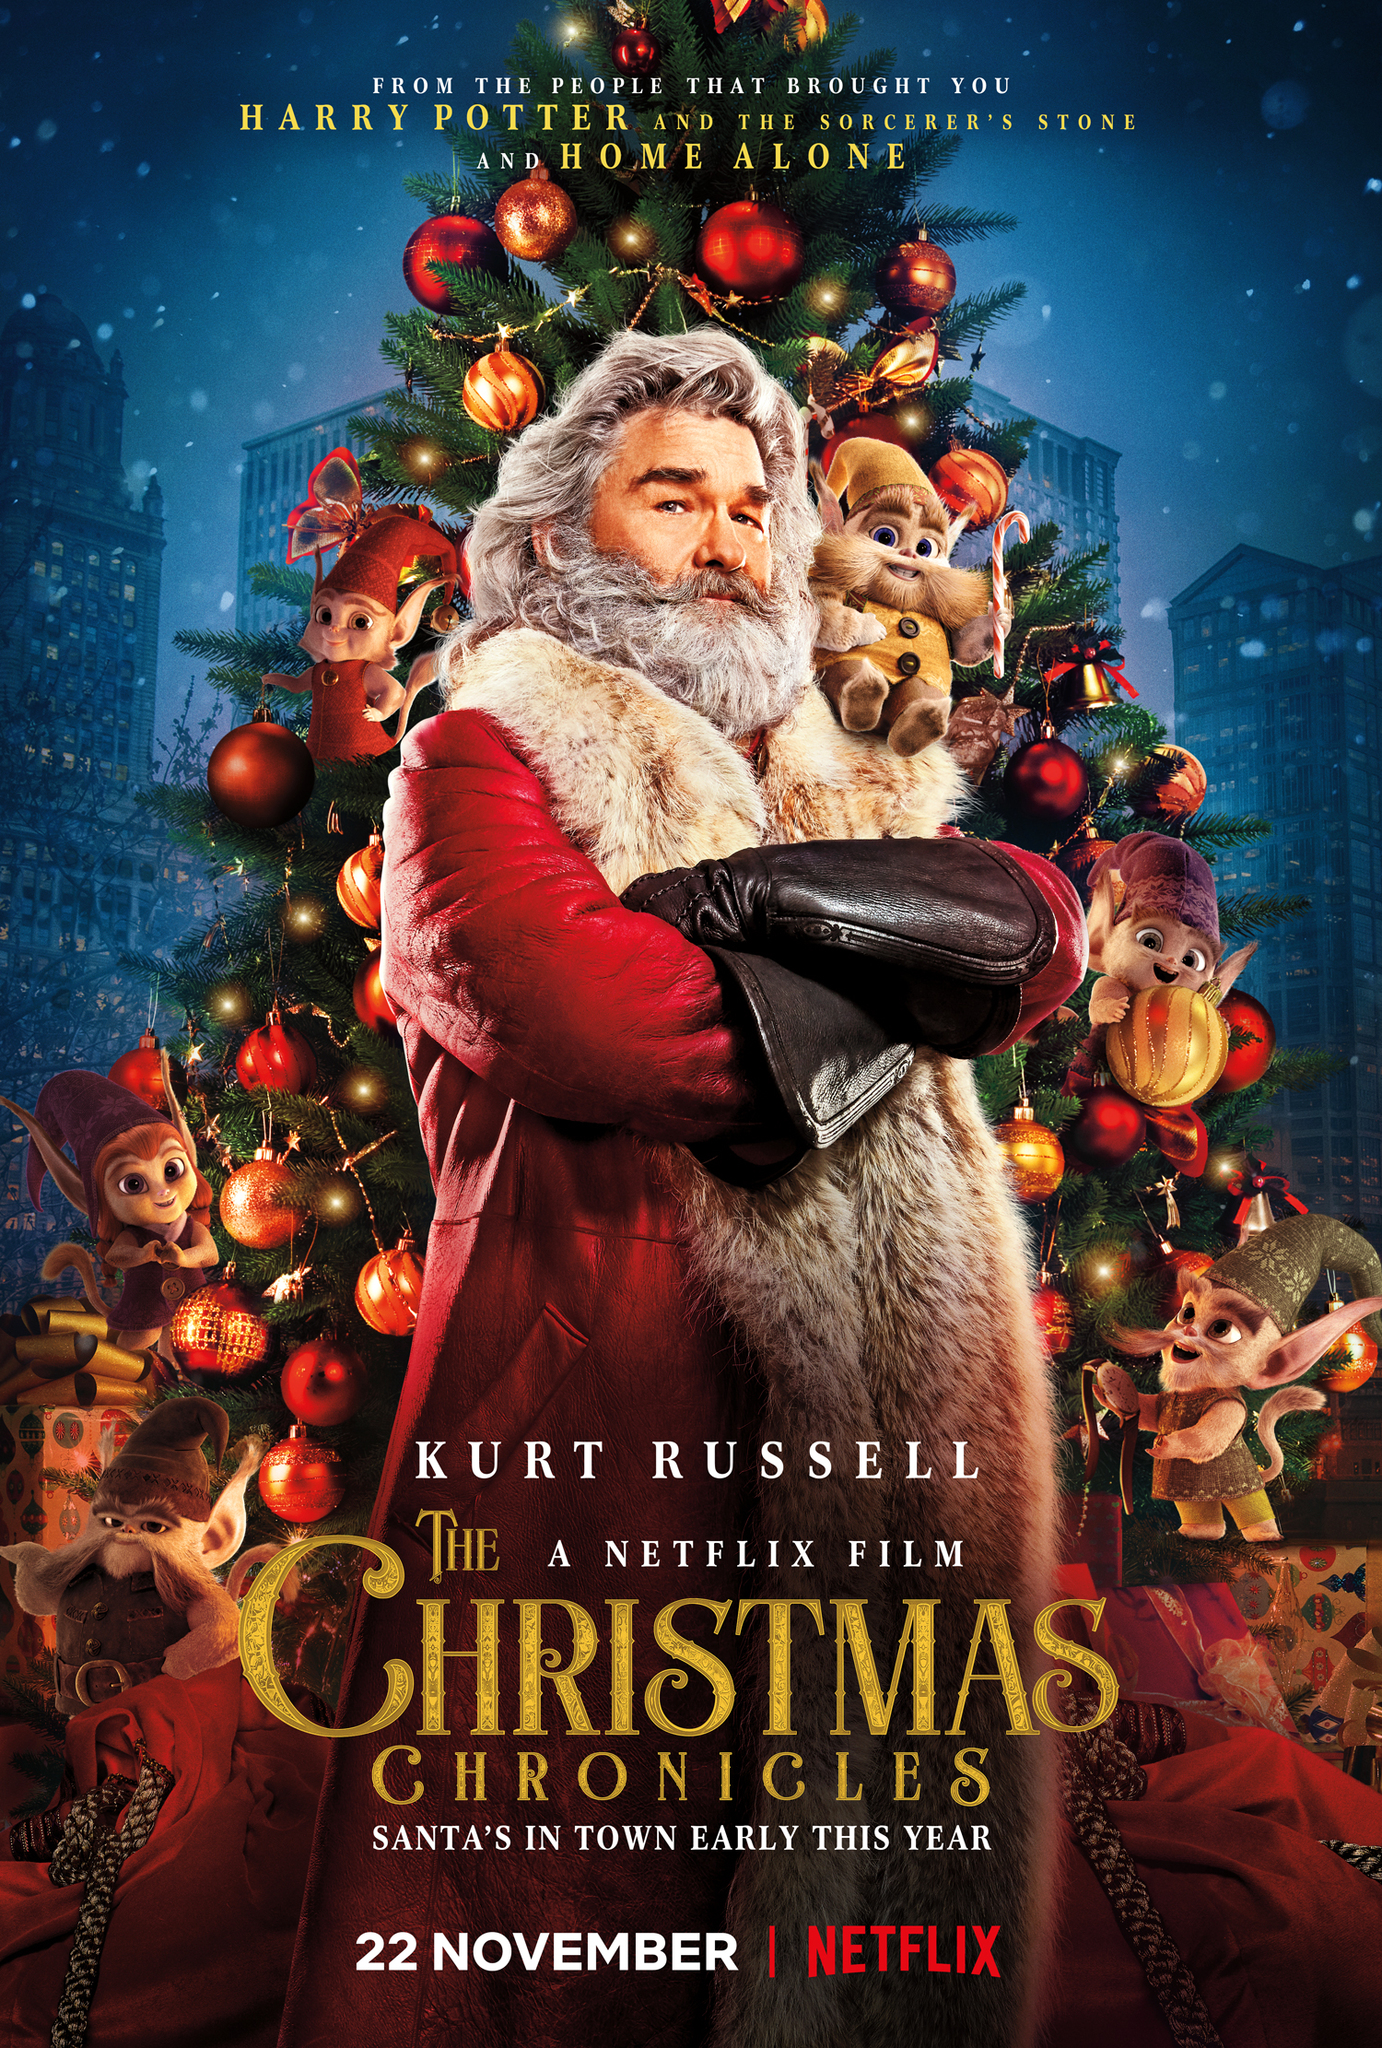 To capture Santa Claus on camera, siblings Kate and Teddy devise a plan on the eve of Christmas. However, when things go awry, they are forced to team up with Saint Nick and save the holiday in time.